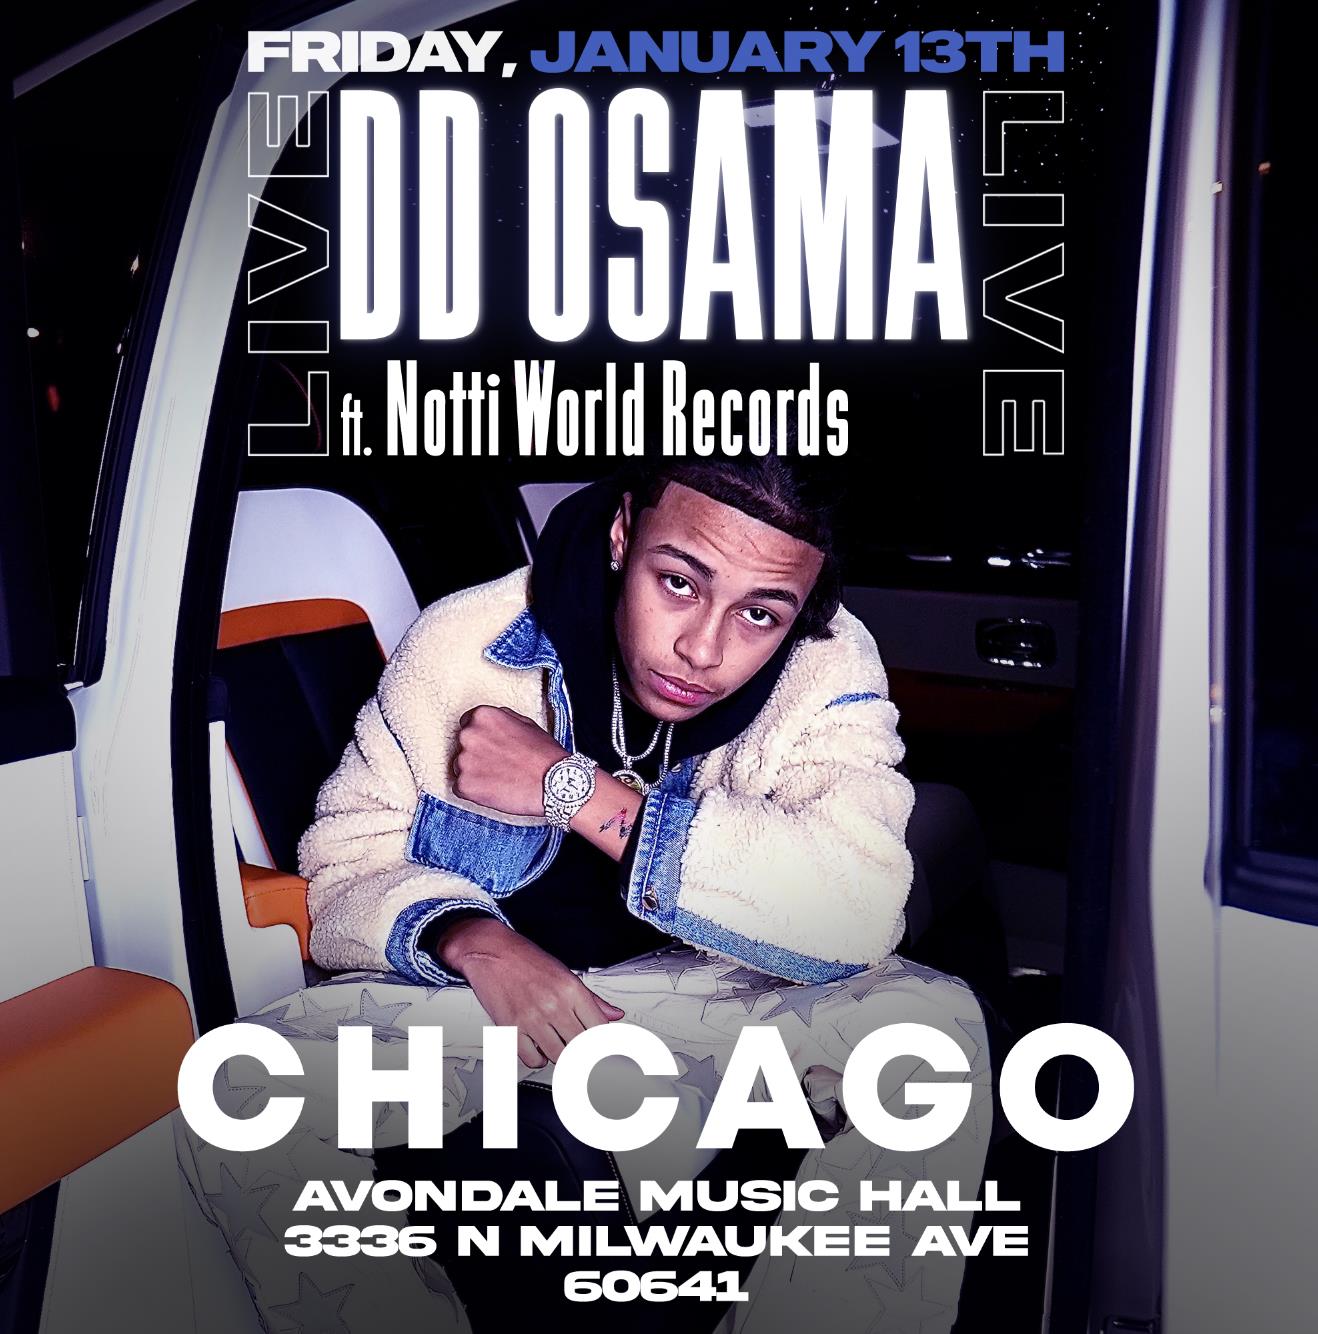 Buy Tickets to DD Osama & Notti World Records in Chicago on Jan 13, 2023